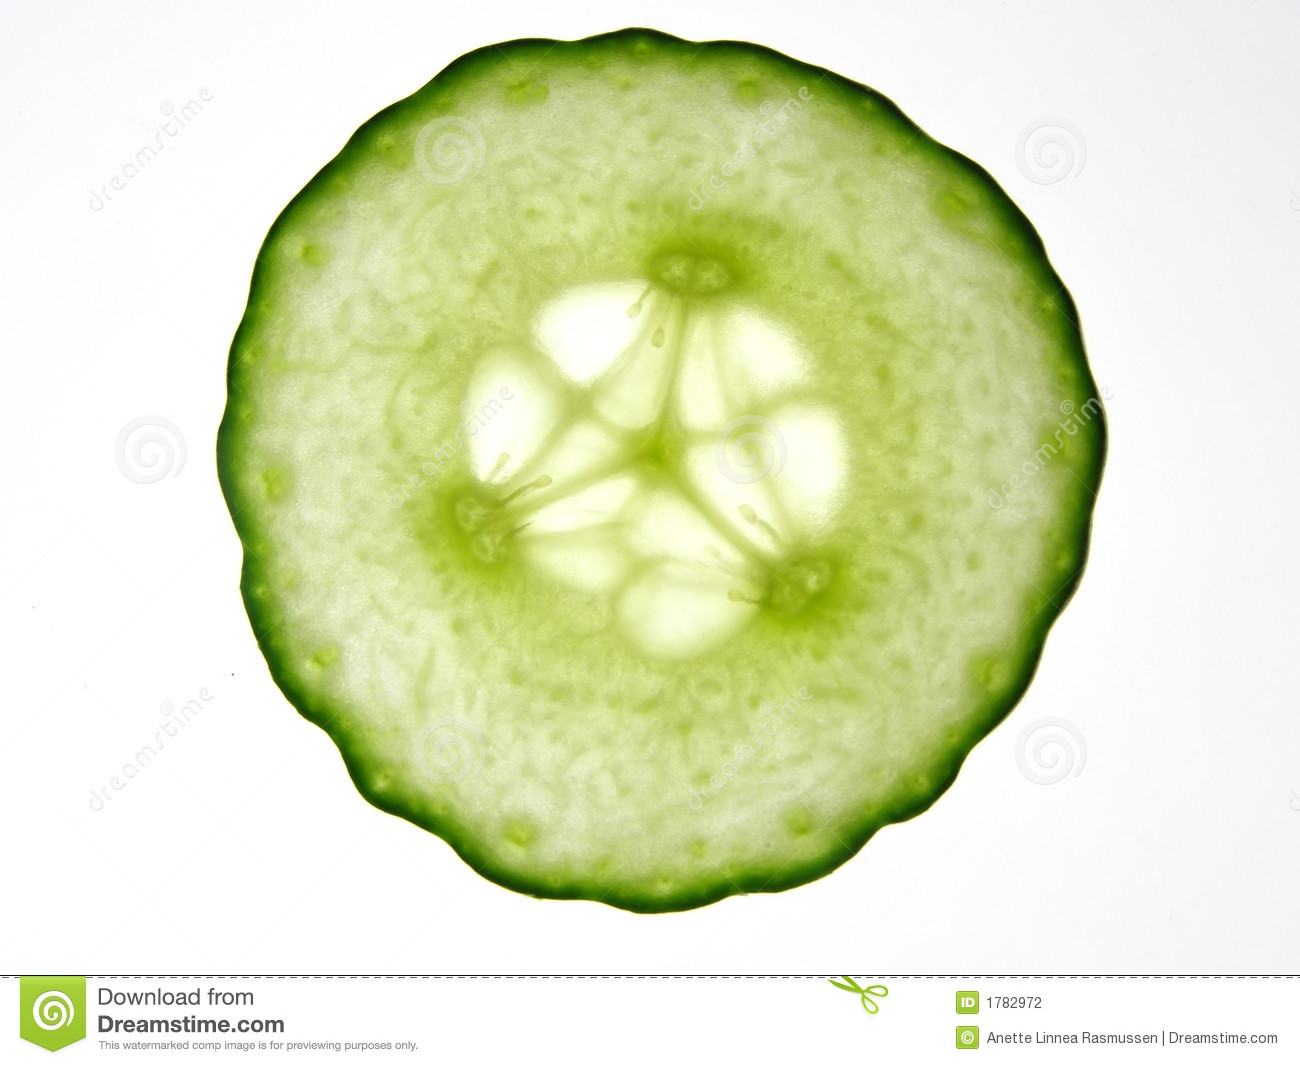 Cucumber Slice Stock Photos, Images, & Pictures.